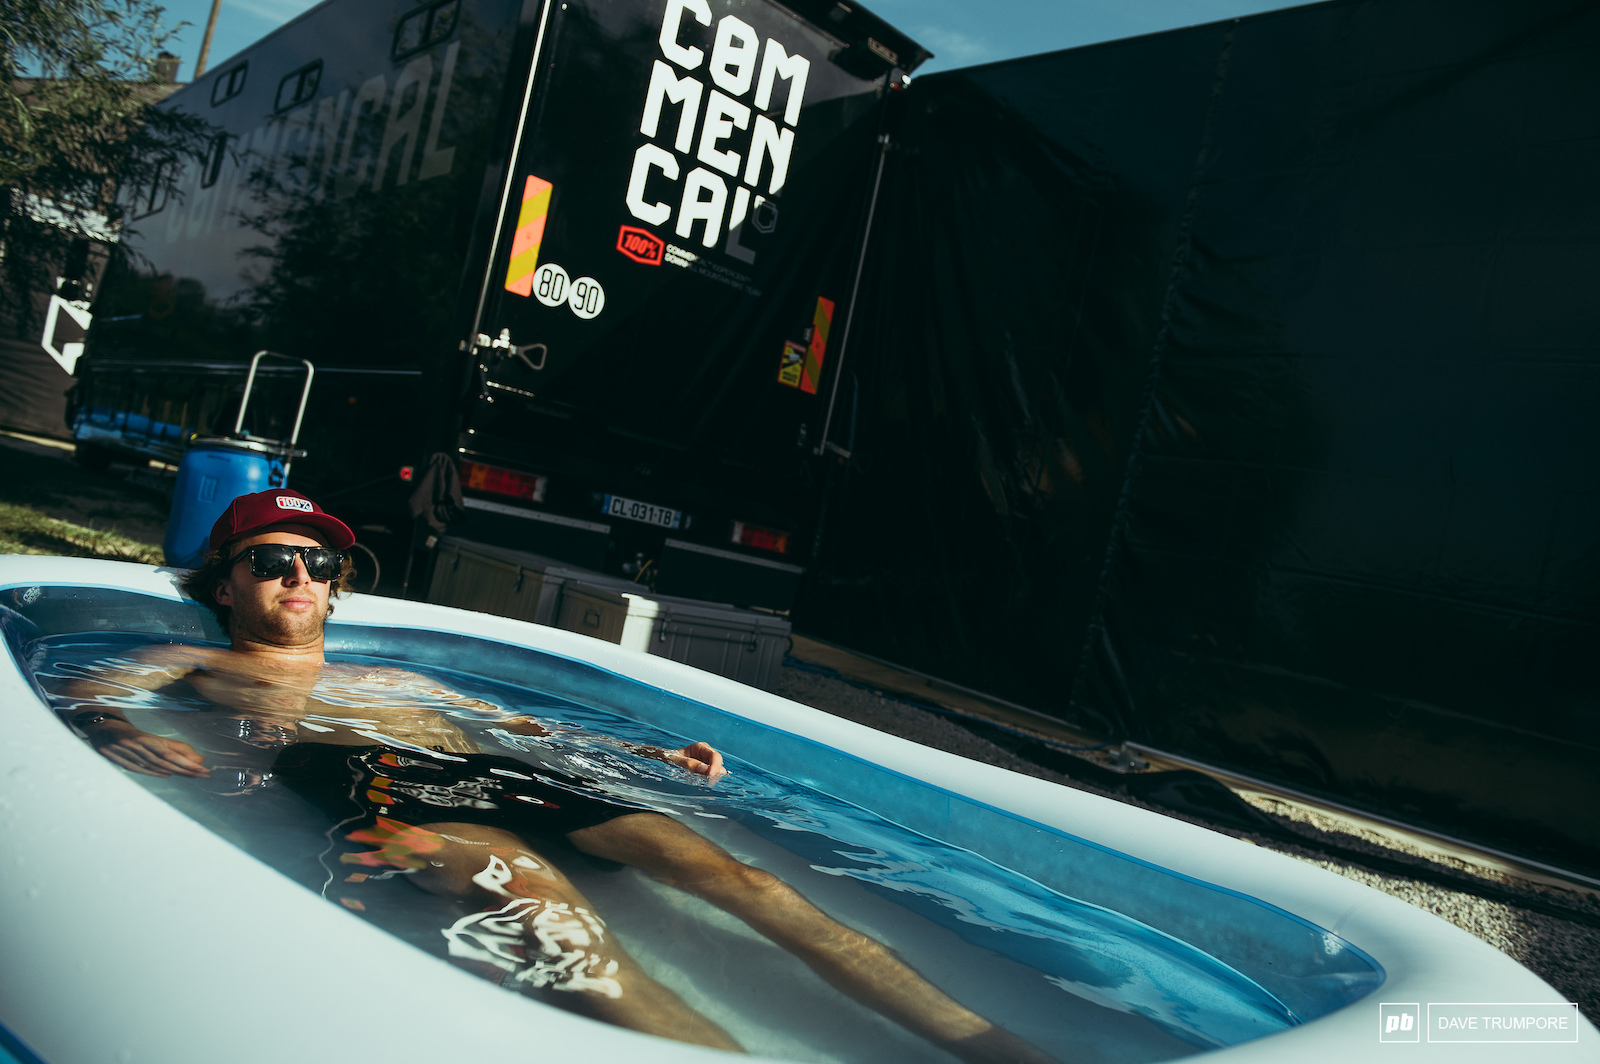 Chill time... many teams have brought out the pools in the pits this week as a way to cool down and escape the heat